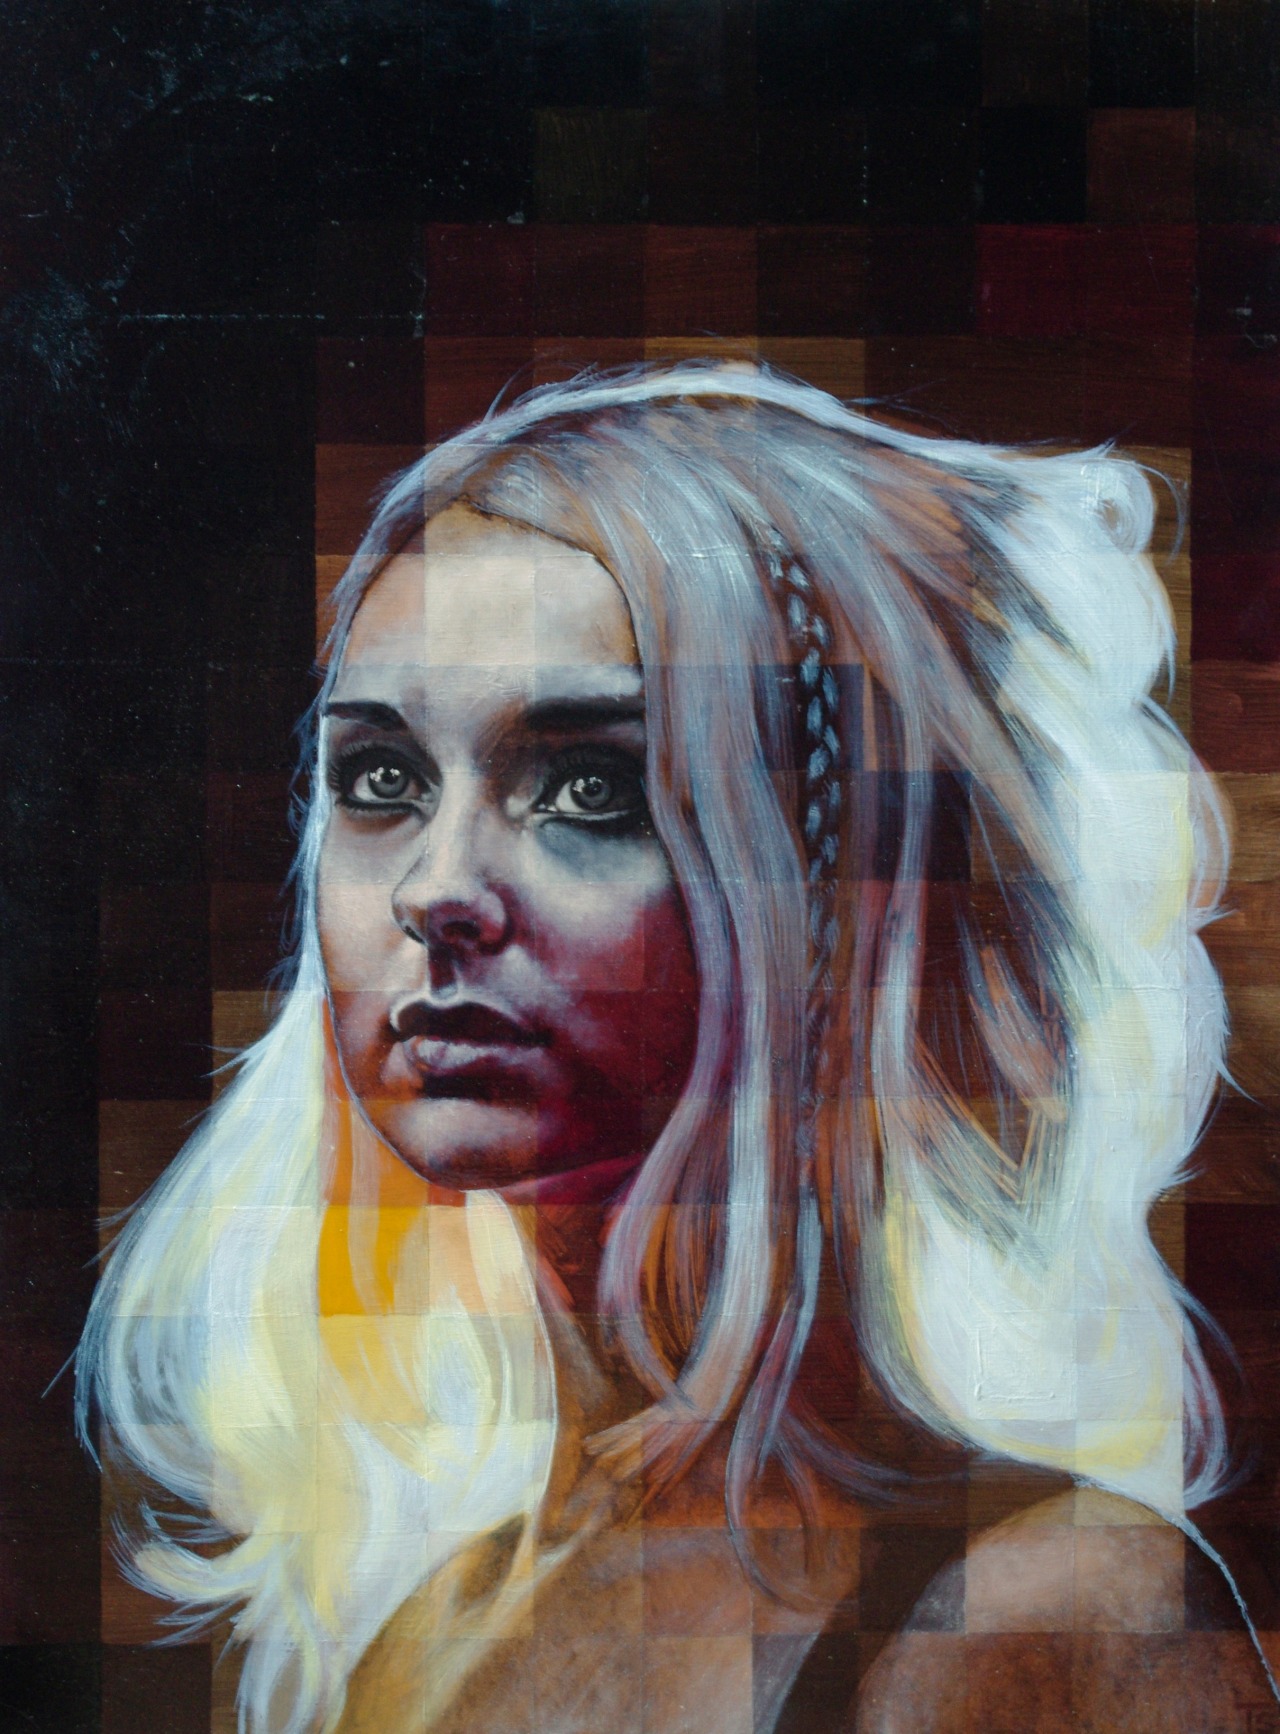 Part of a pixelated portrait series I’ve been working on mixed media on masonite panel 16"x20" Facebook / Tumblr / Deviantart